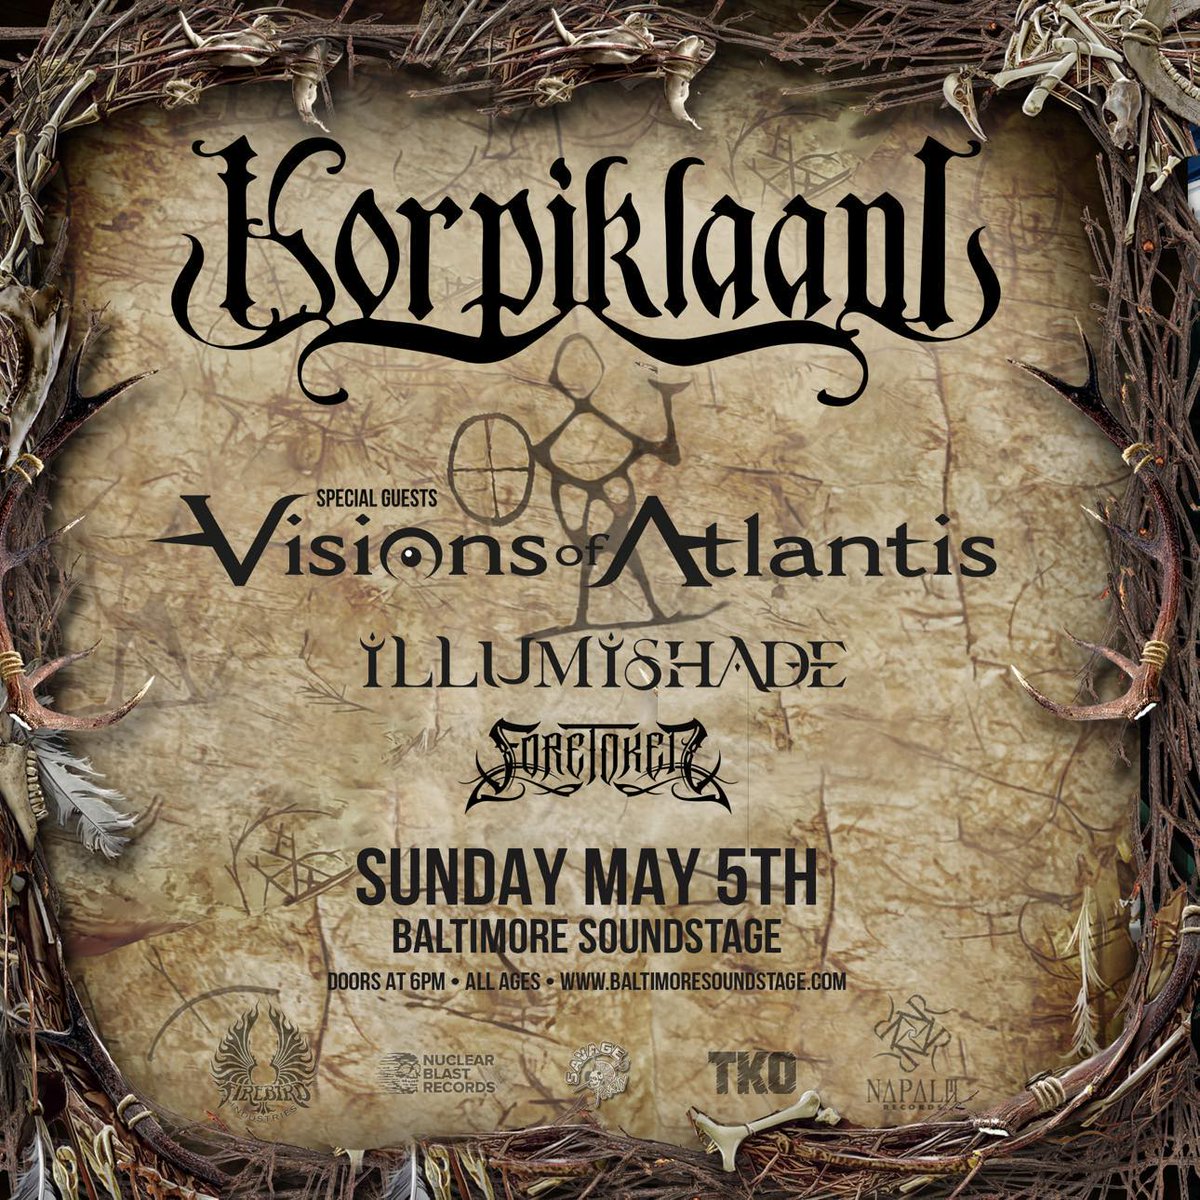 Foretoken will join @_korpiklaani, Visions of Atlantis, Illumishade at the @BmoreSoundstage on May 5th! 🤘🤘 @ProstheticRcds #metalshow